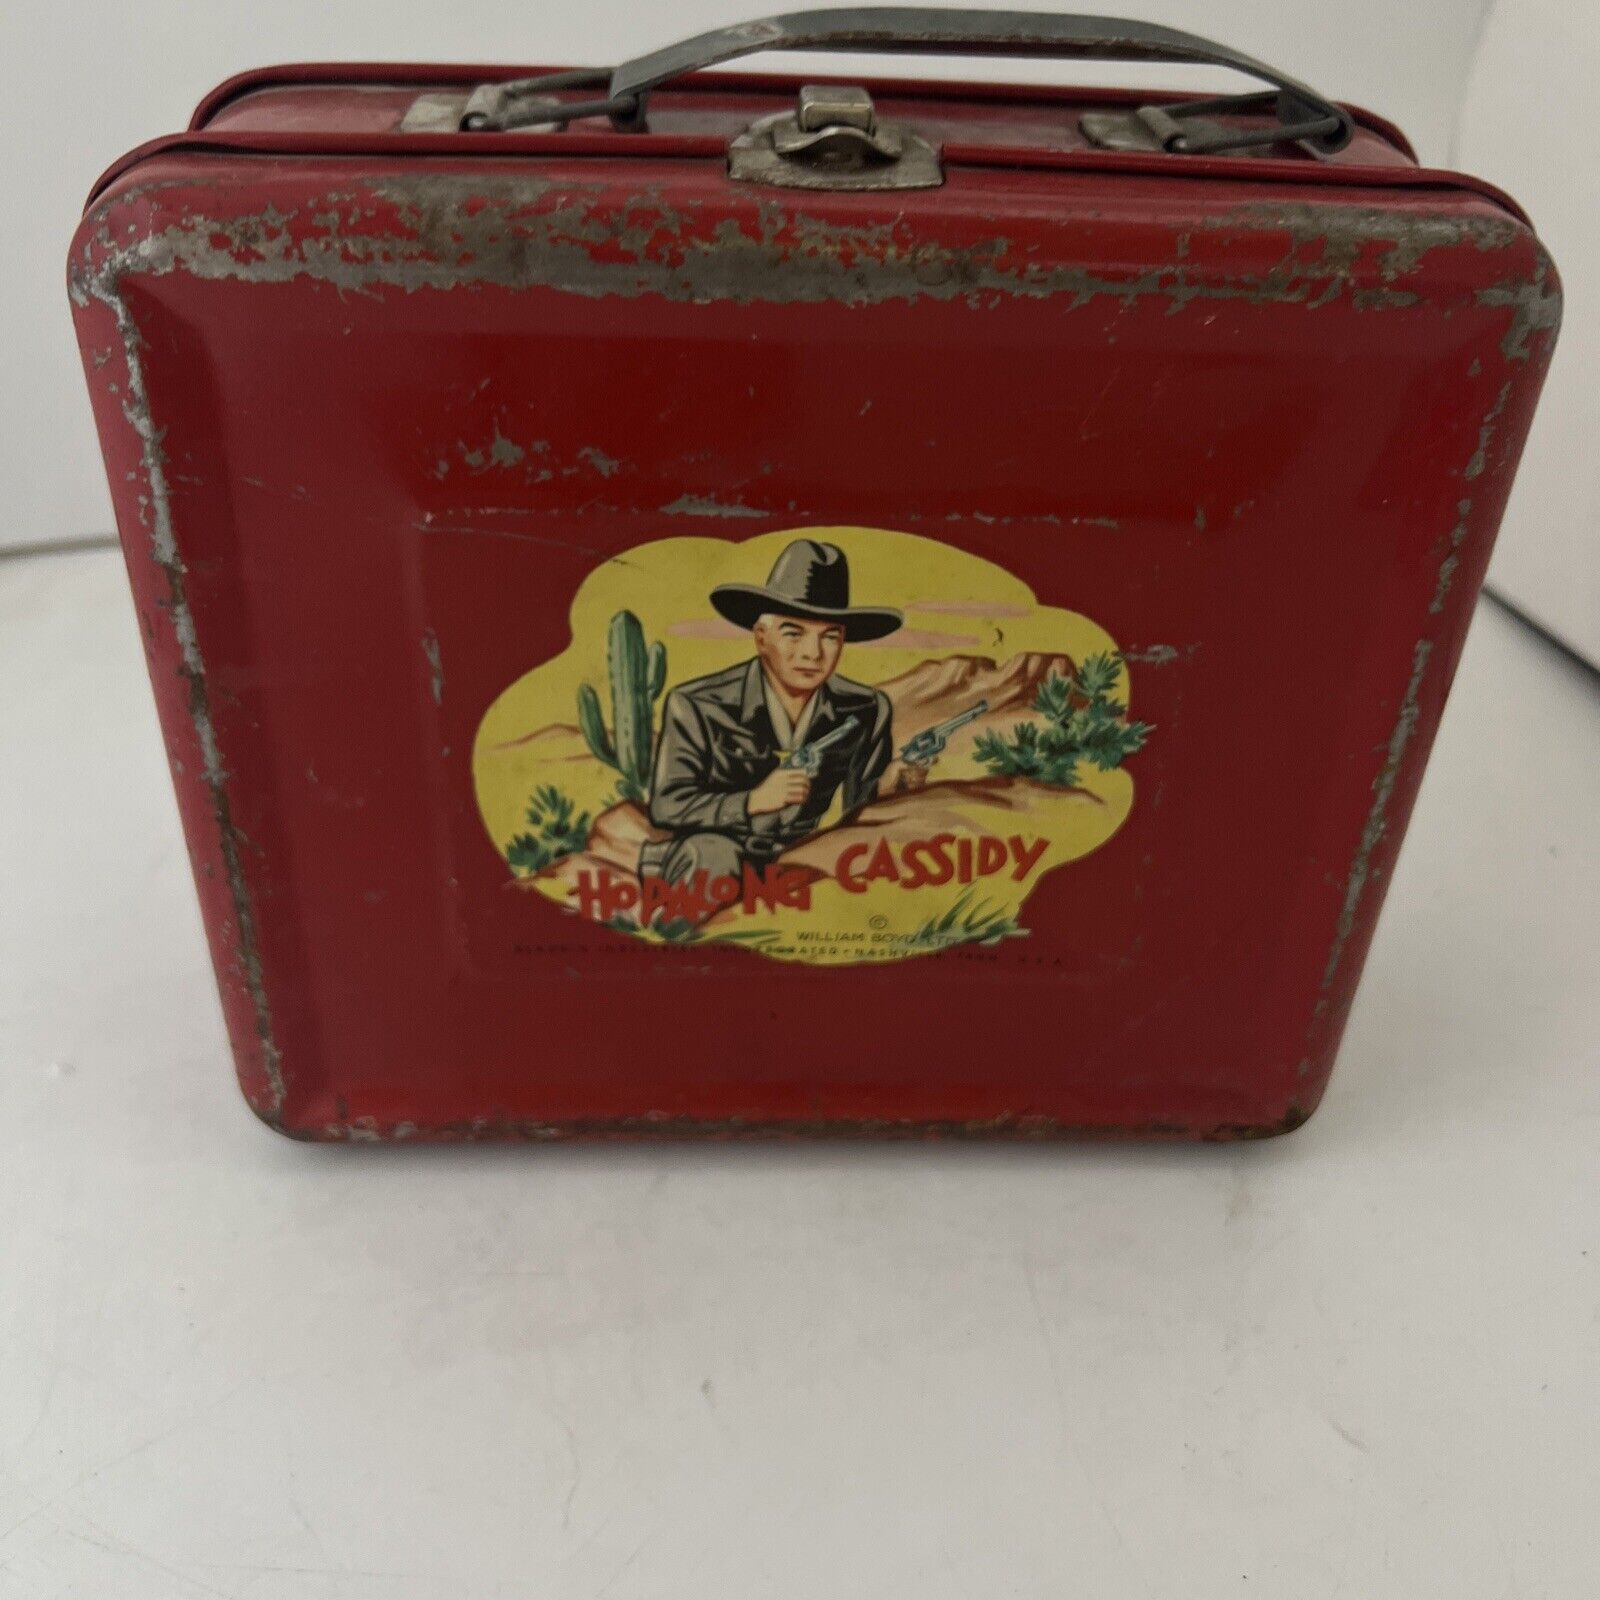 Vintage 1950 Hopalong Cassidy Divided Red Metal Lunchbox Aladdin Ind.-No Thermos